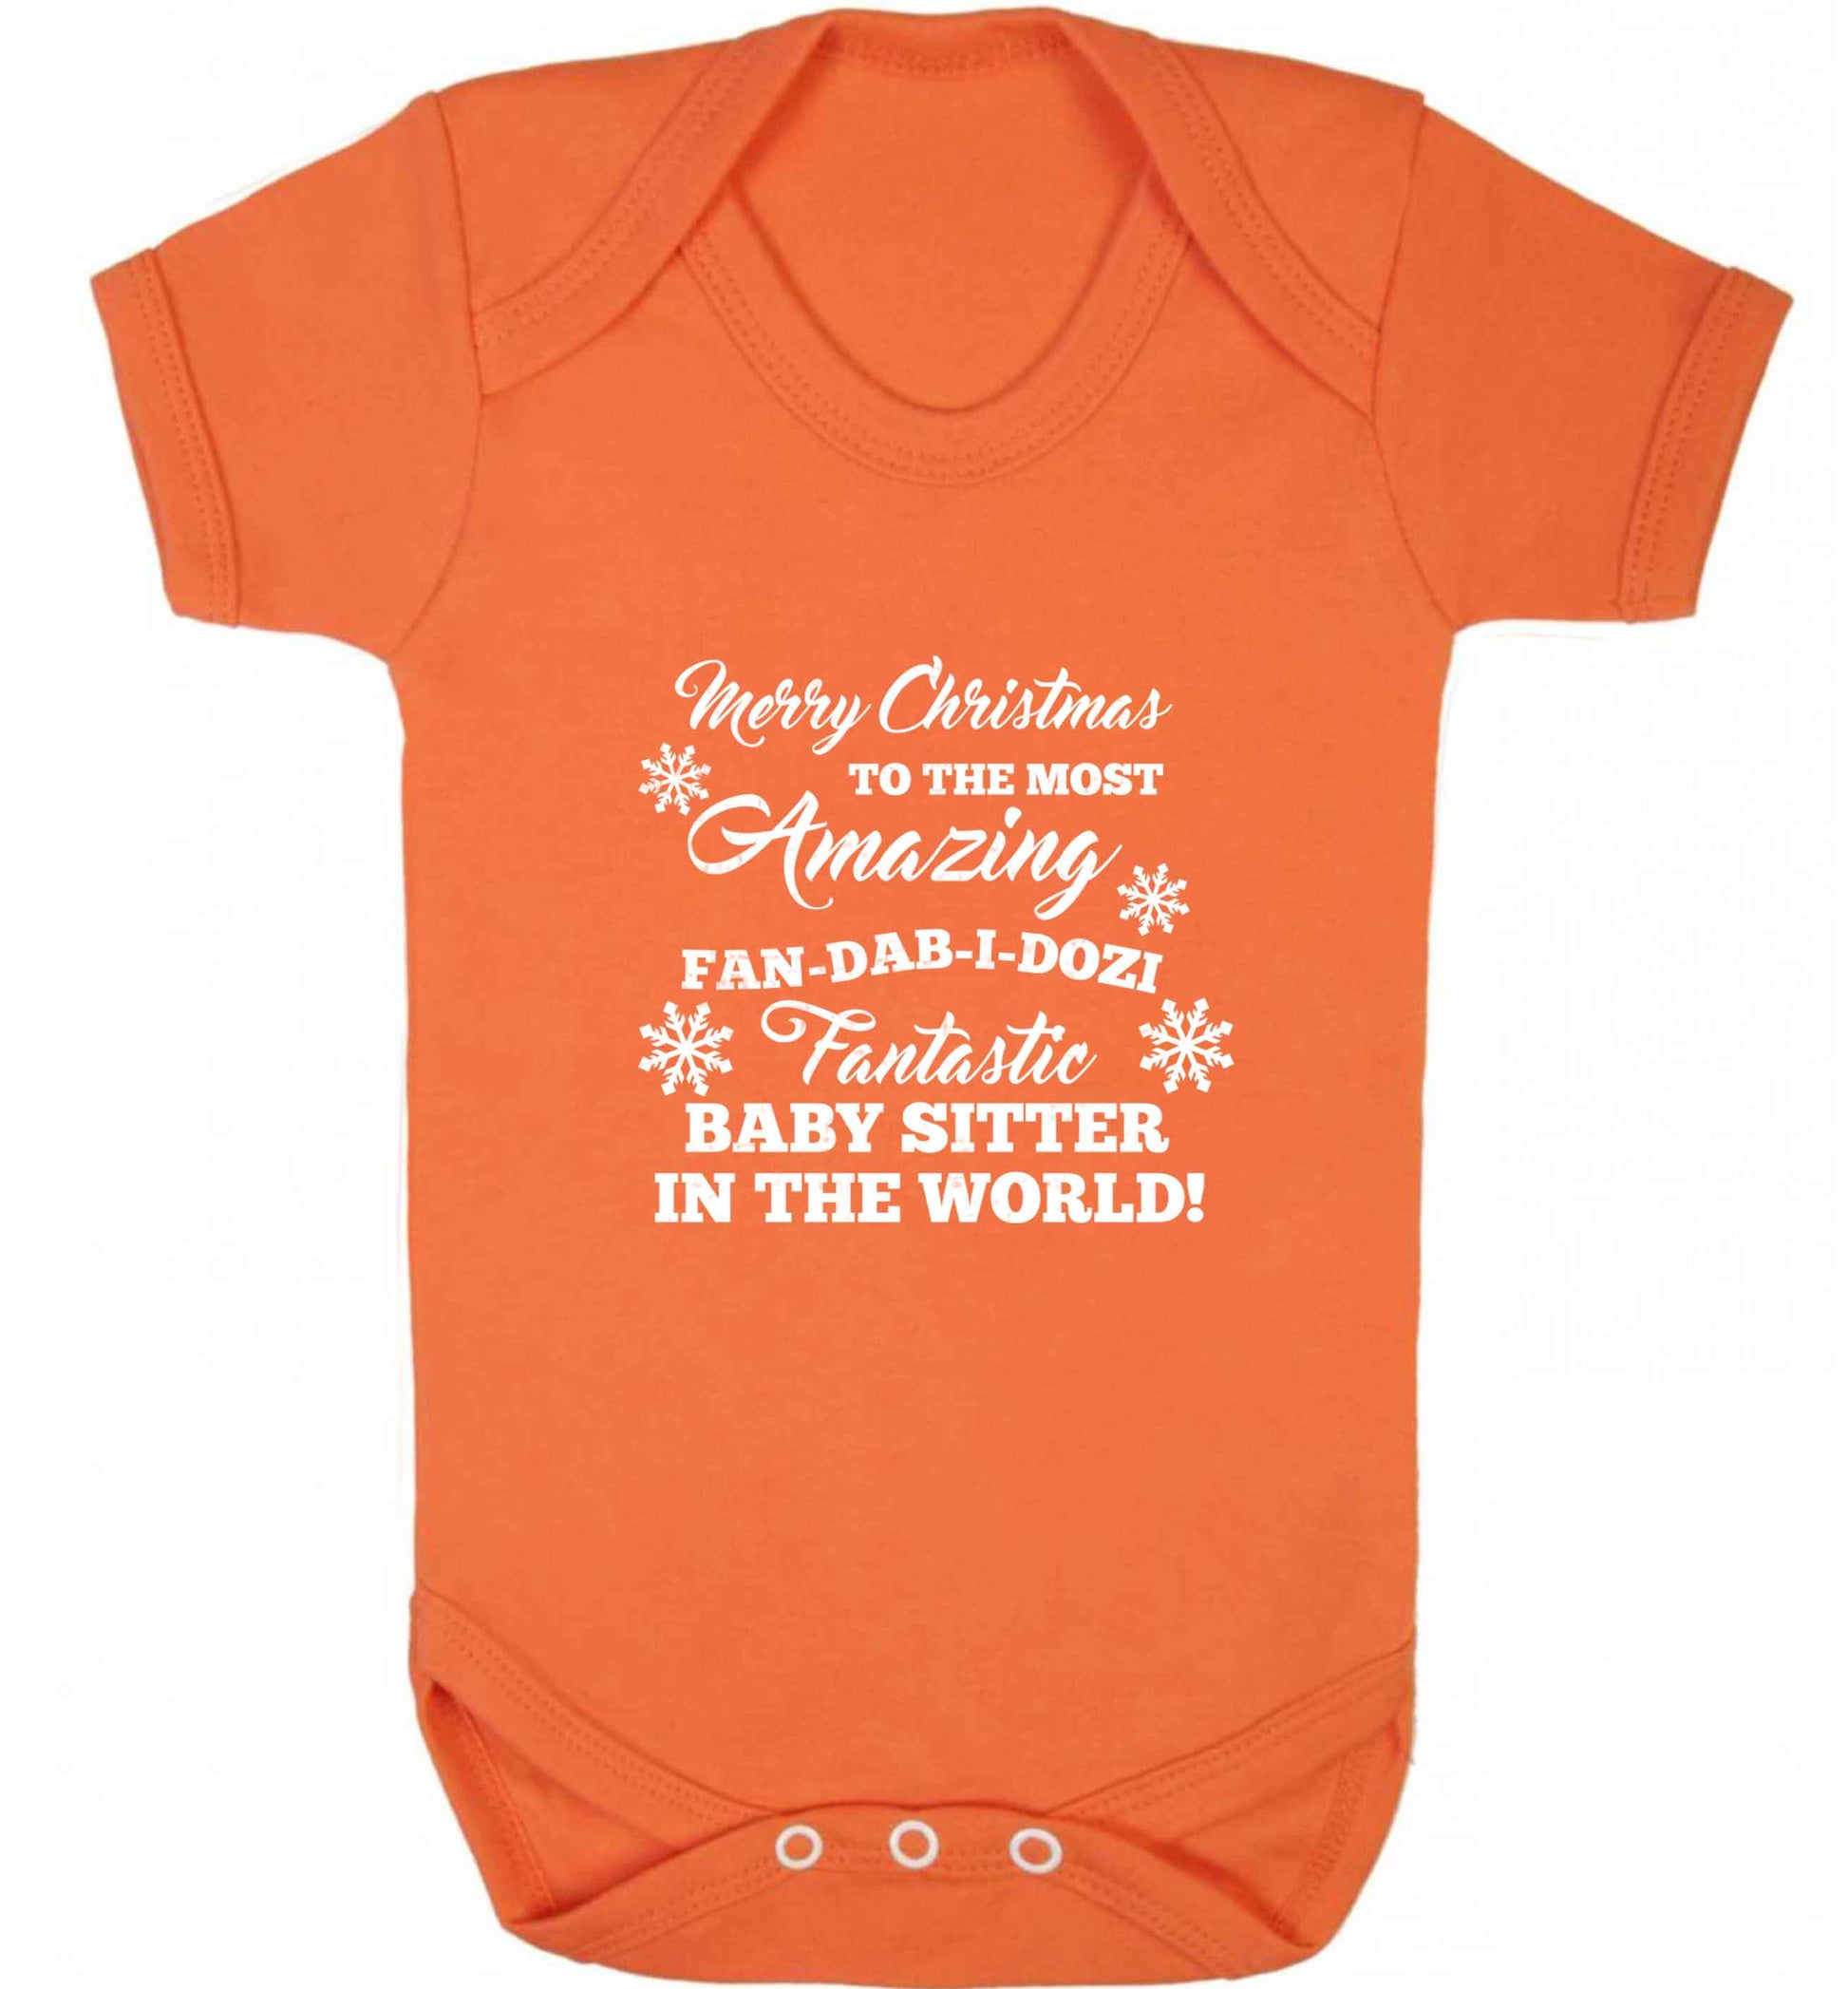 Merry Christmas to the most amazing fan-dab-i-dozi fantasic baby sitter in the world baby vest orange 18-24 months